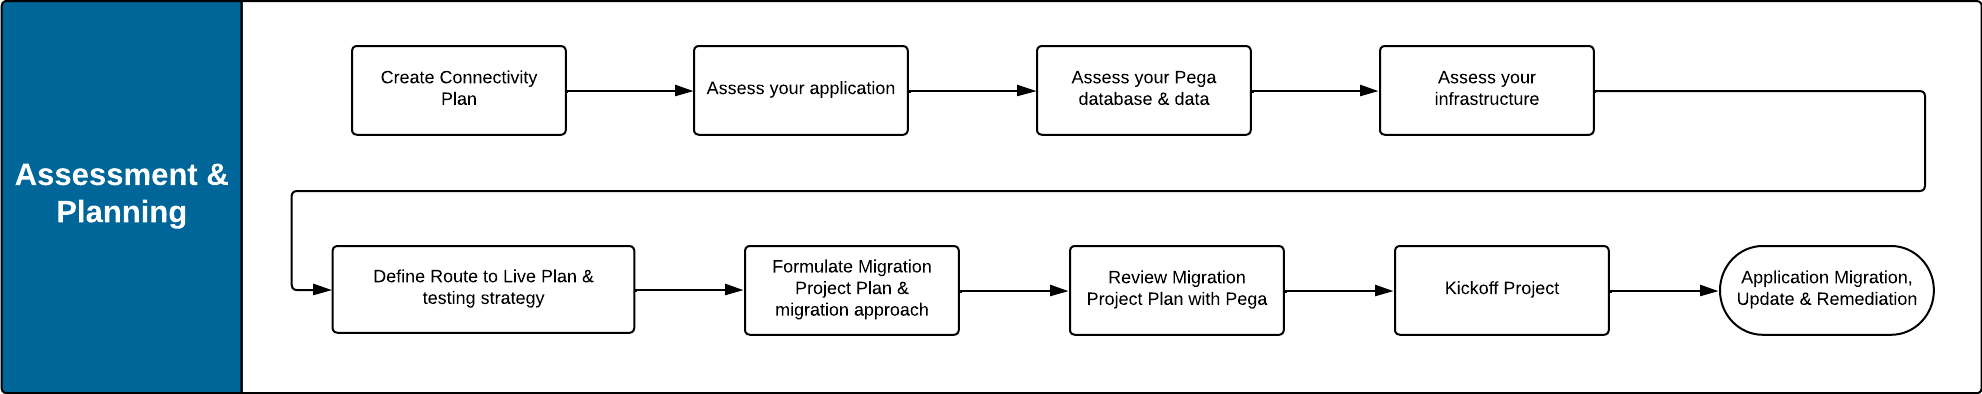 flow diagram of assement and planning phase